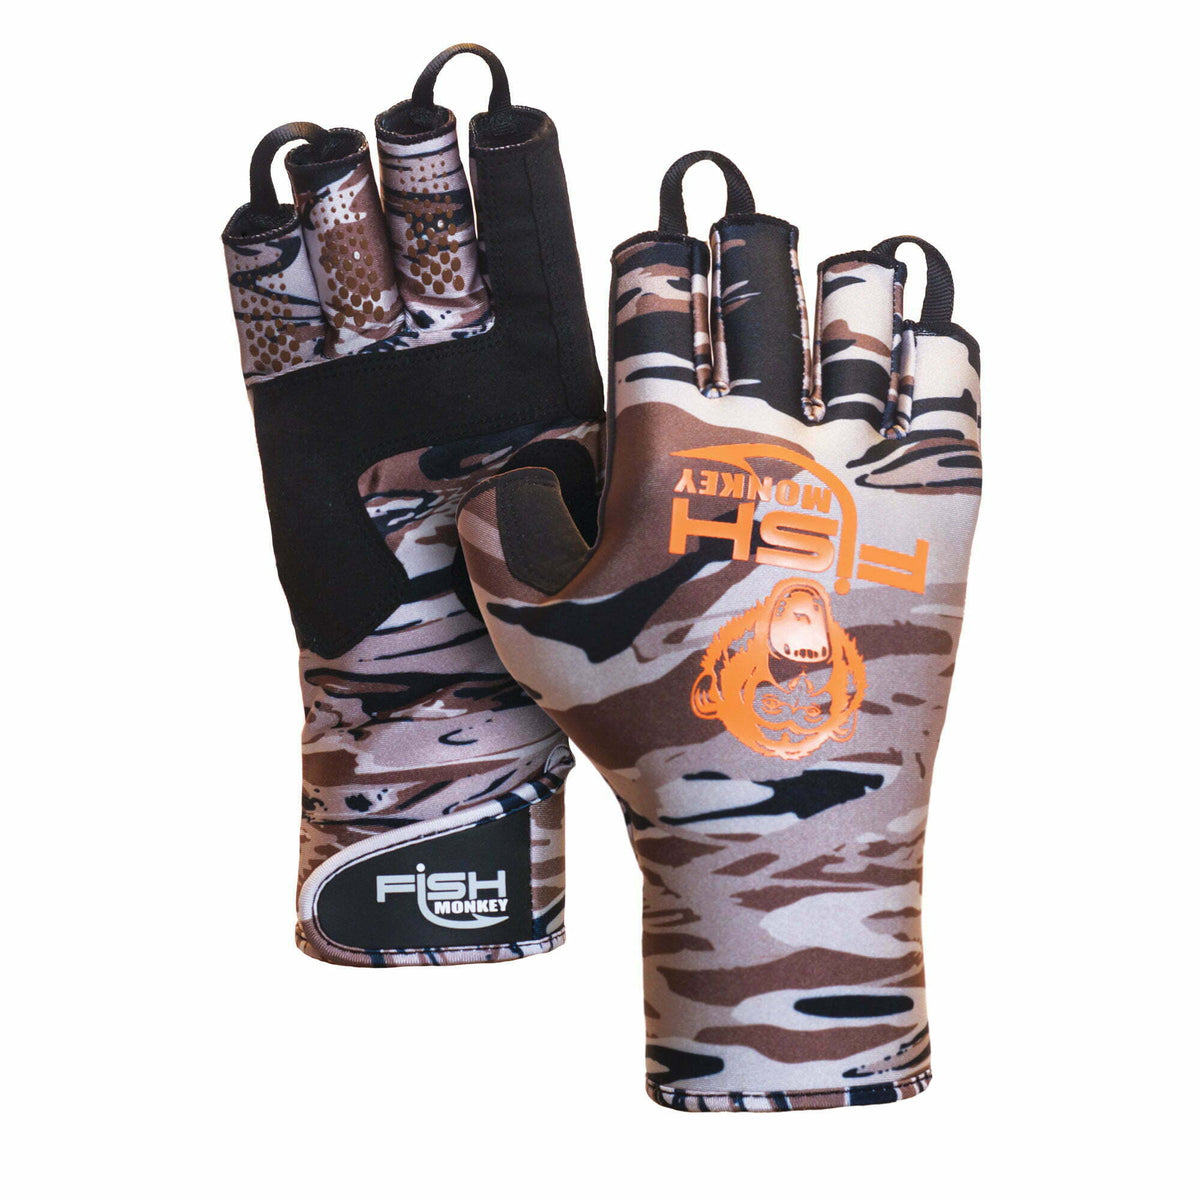 BACKCOUNTRY 2 FALL WATER CAMO GLOVES